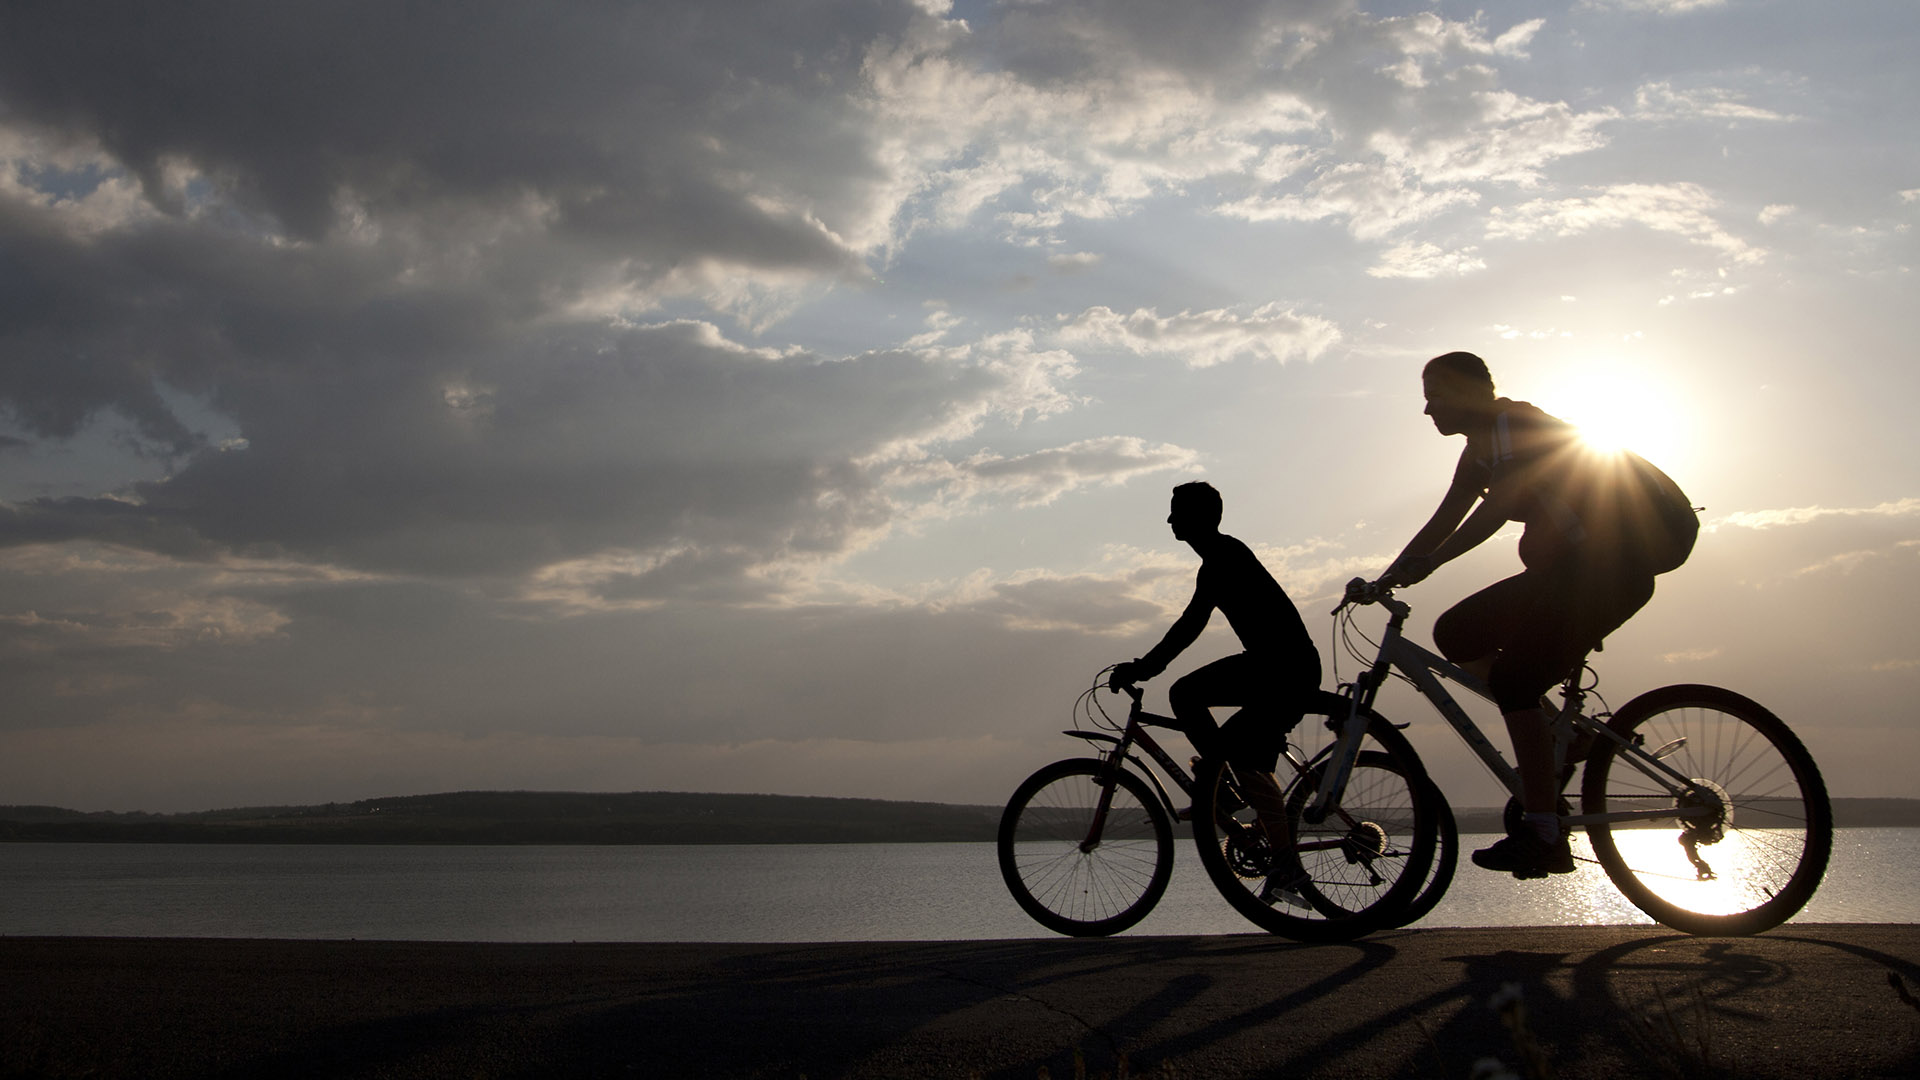 Bicycle riders at sunset. Shutterstock image